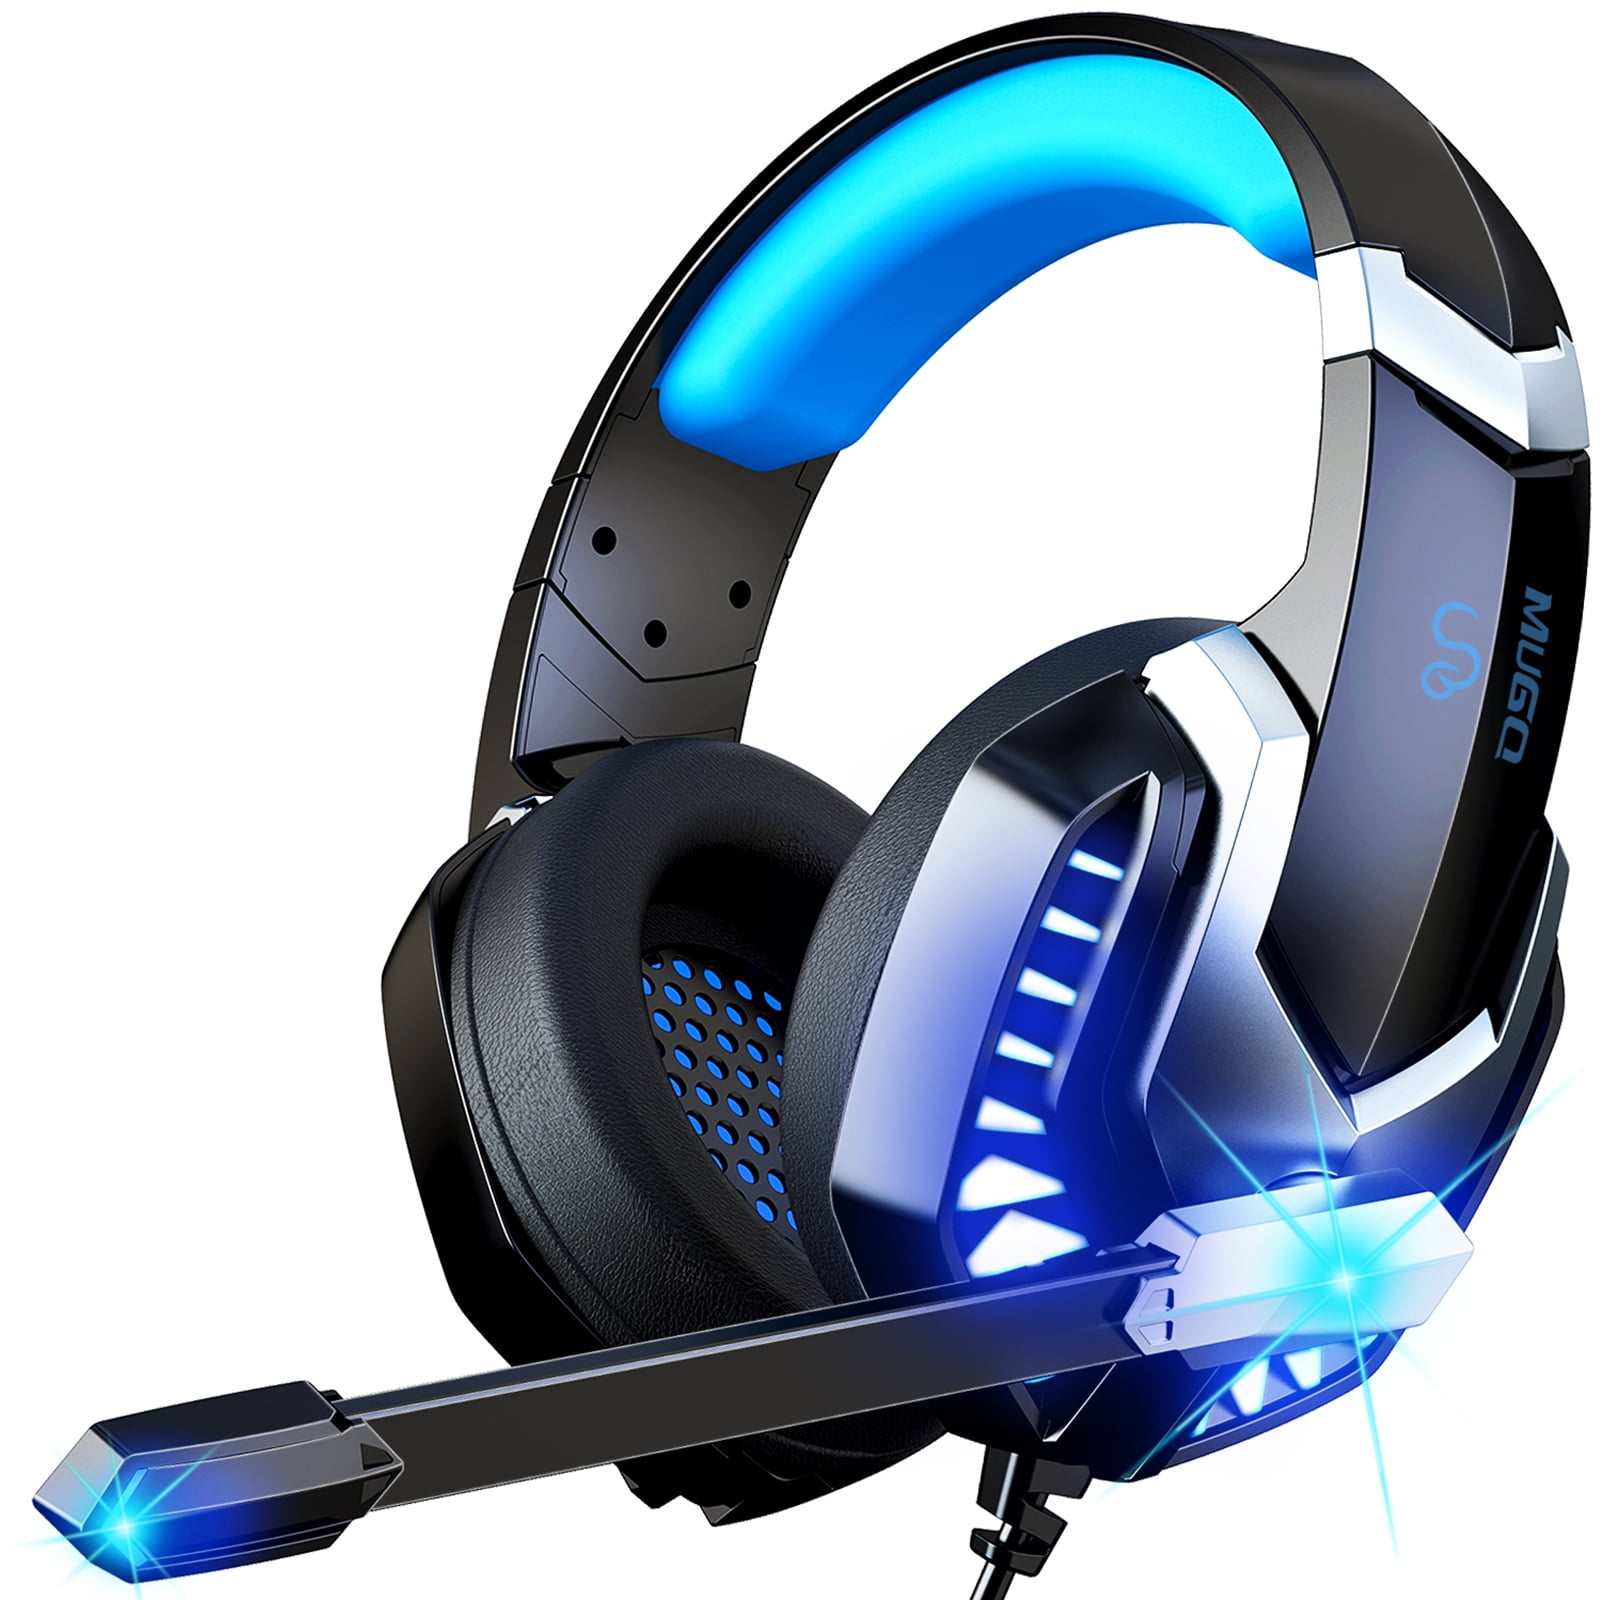 Donerton Gaming Headset, Over-Ear Gaming Headphones with Noise Canceling Mic, Stereo Bass Sound, LED Light, Soft Memory Earmuffs PS4 Gaming Headset Compatible with PC, Laptop,Tablet - Walmart.com